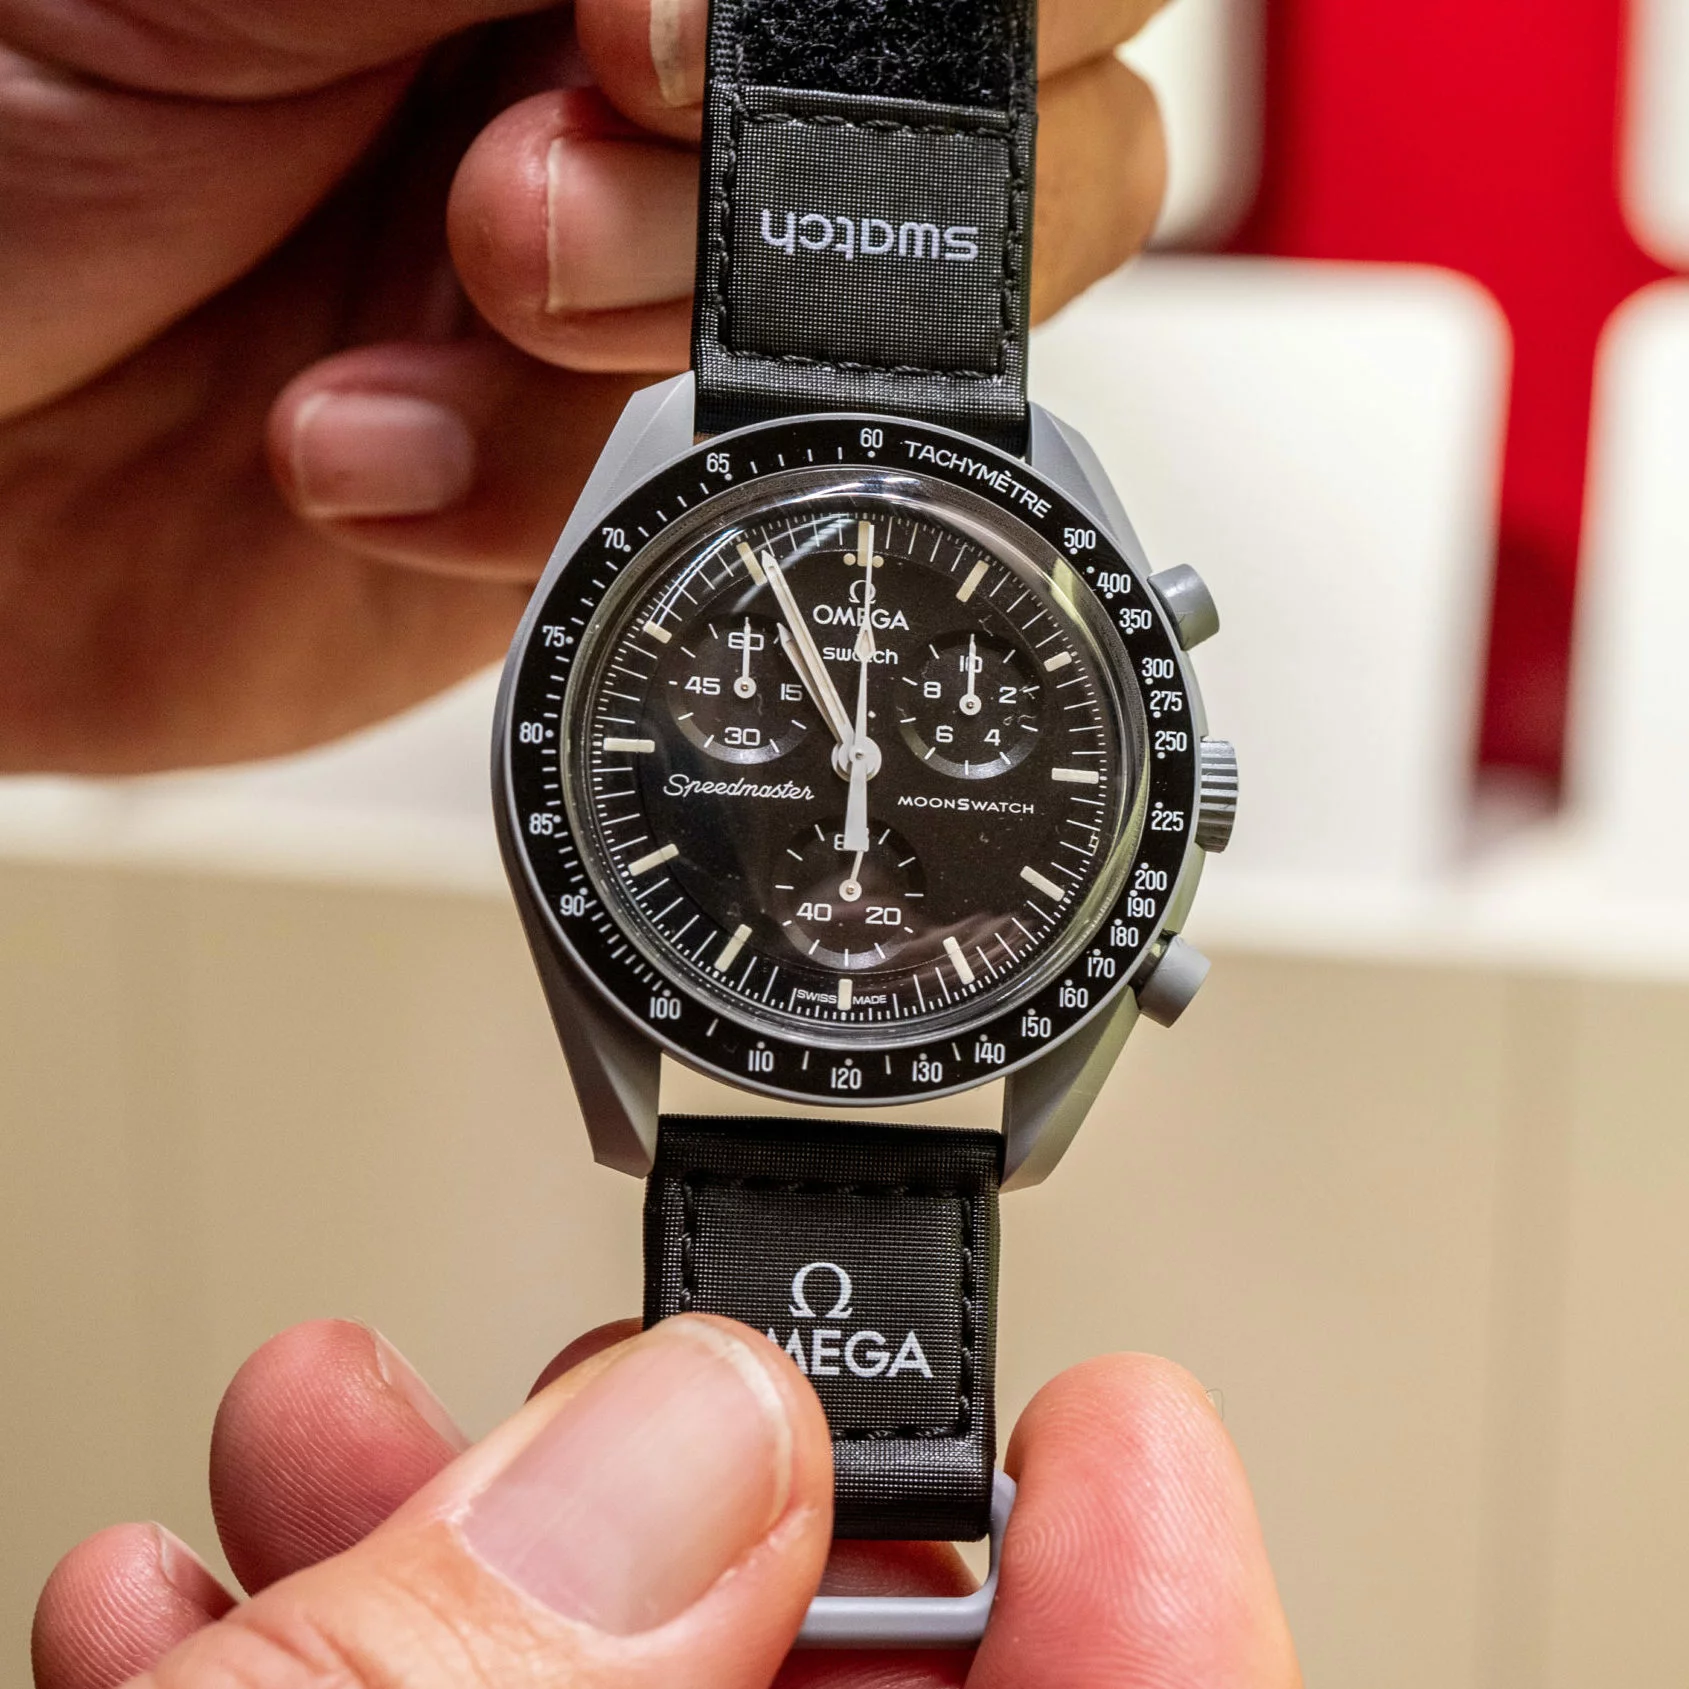 OMEGA X SWATCH  MISSION TO THE MOON